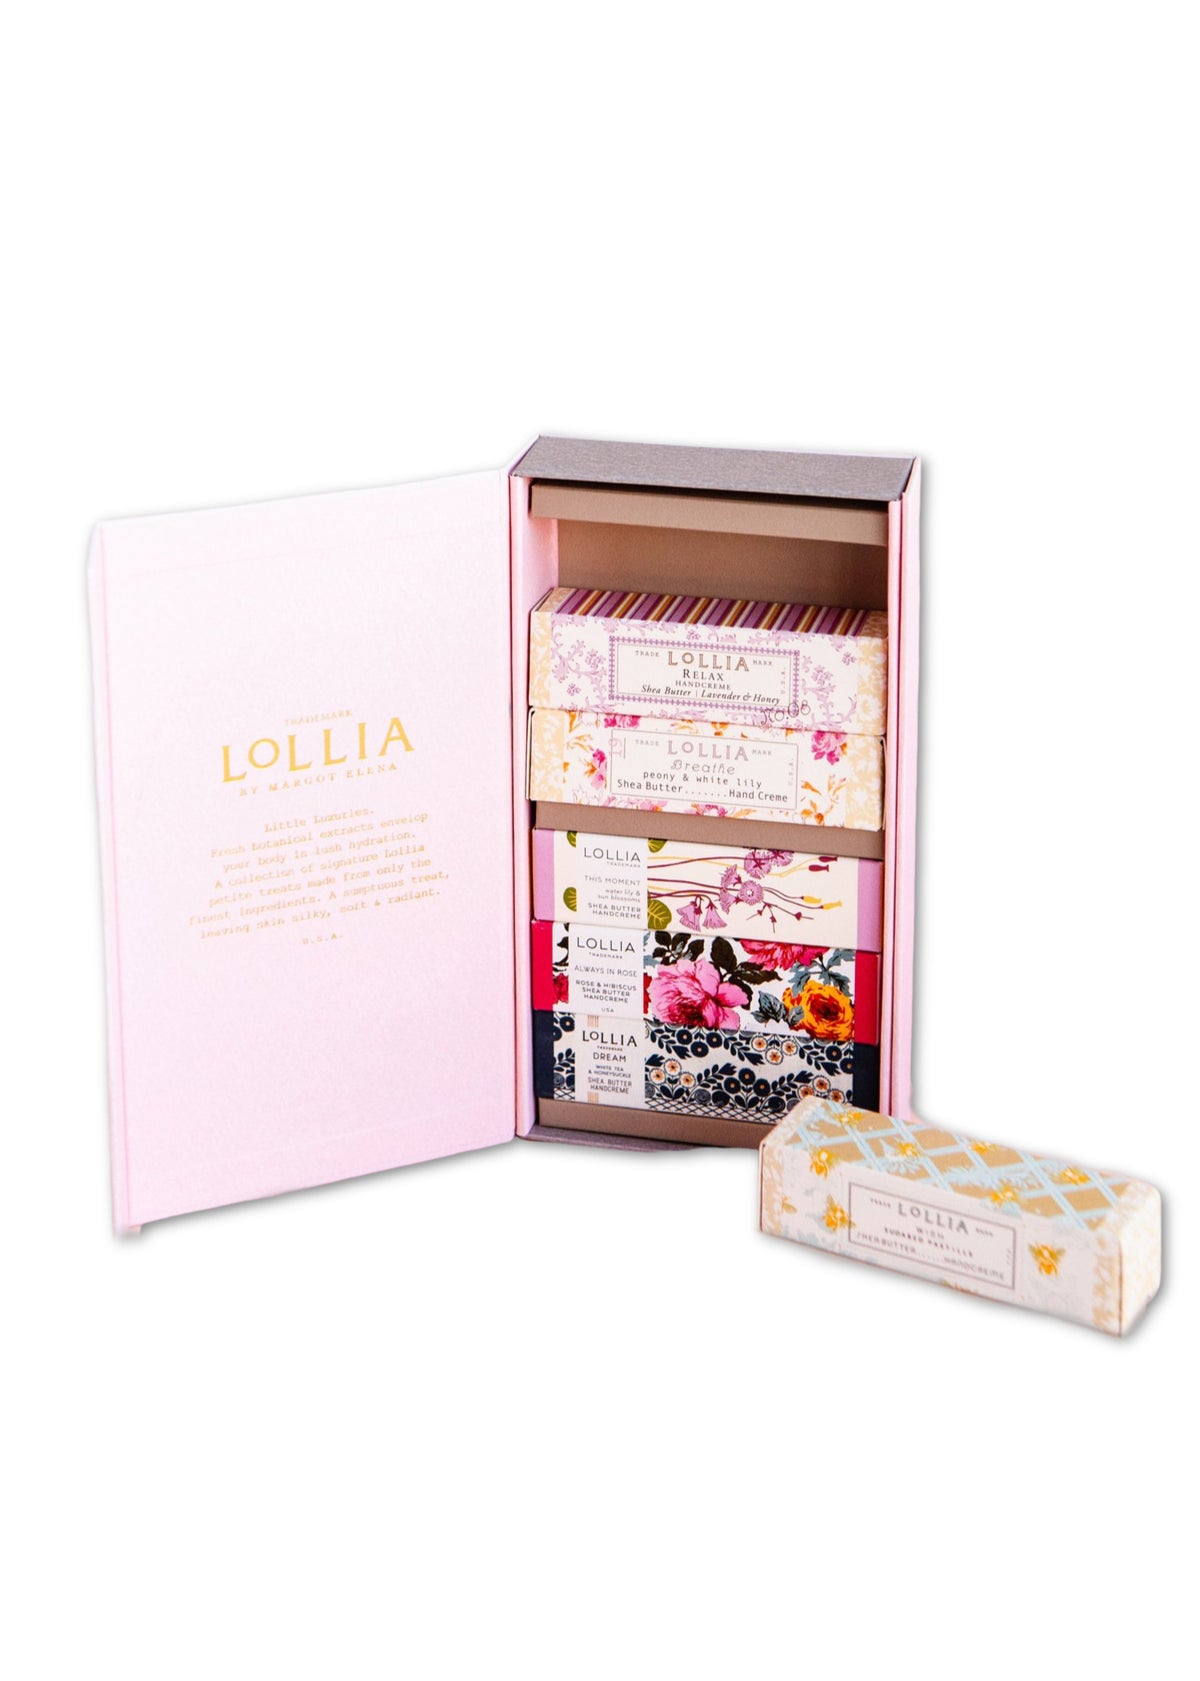 A Margot Elena Lollia Petite Treat Handcreme Gift Set opens to reveal a collection of bath products, including soap bars and hand cream, each decorated with floral designs, against a pastel pink background.